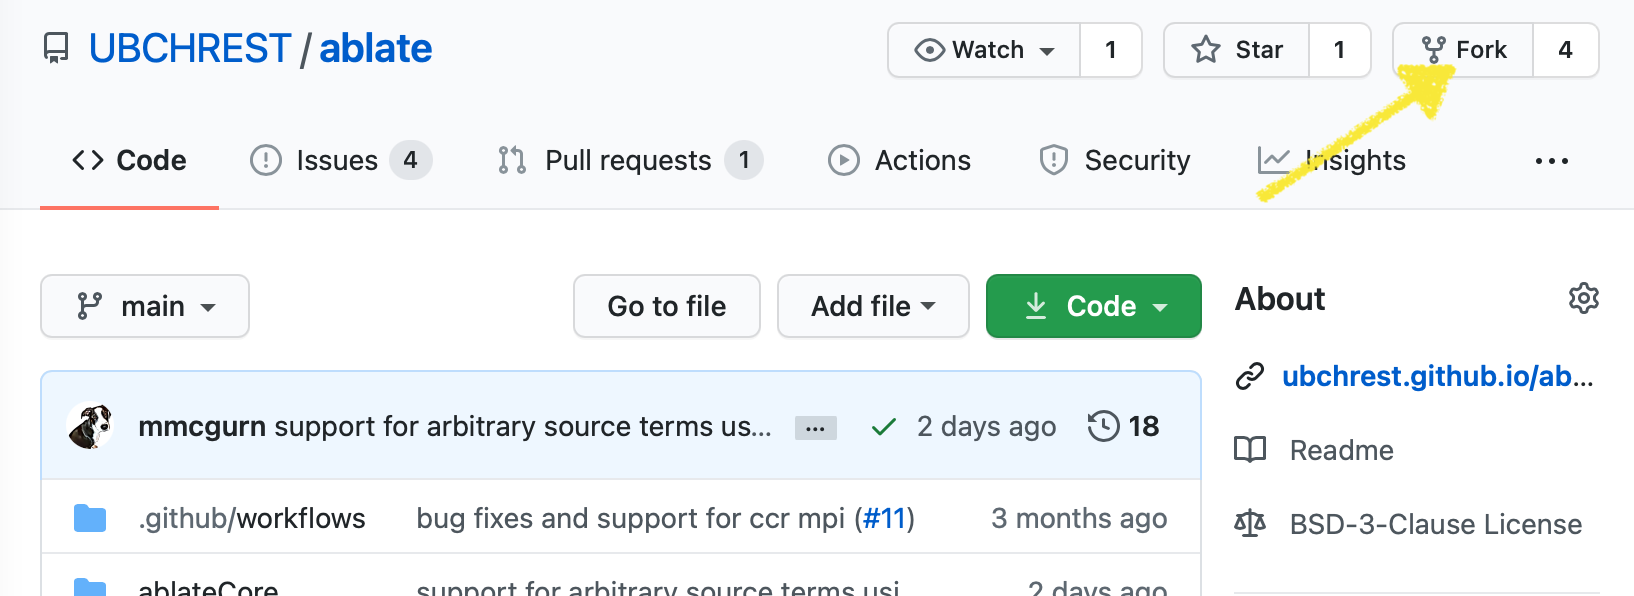 GitHub fork button location